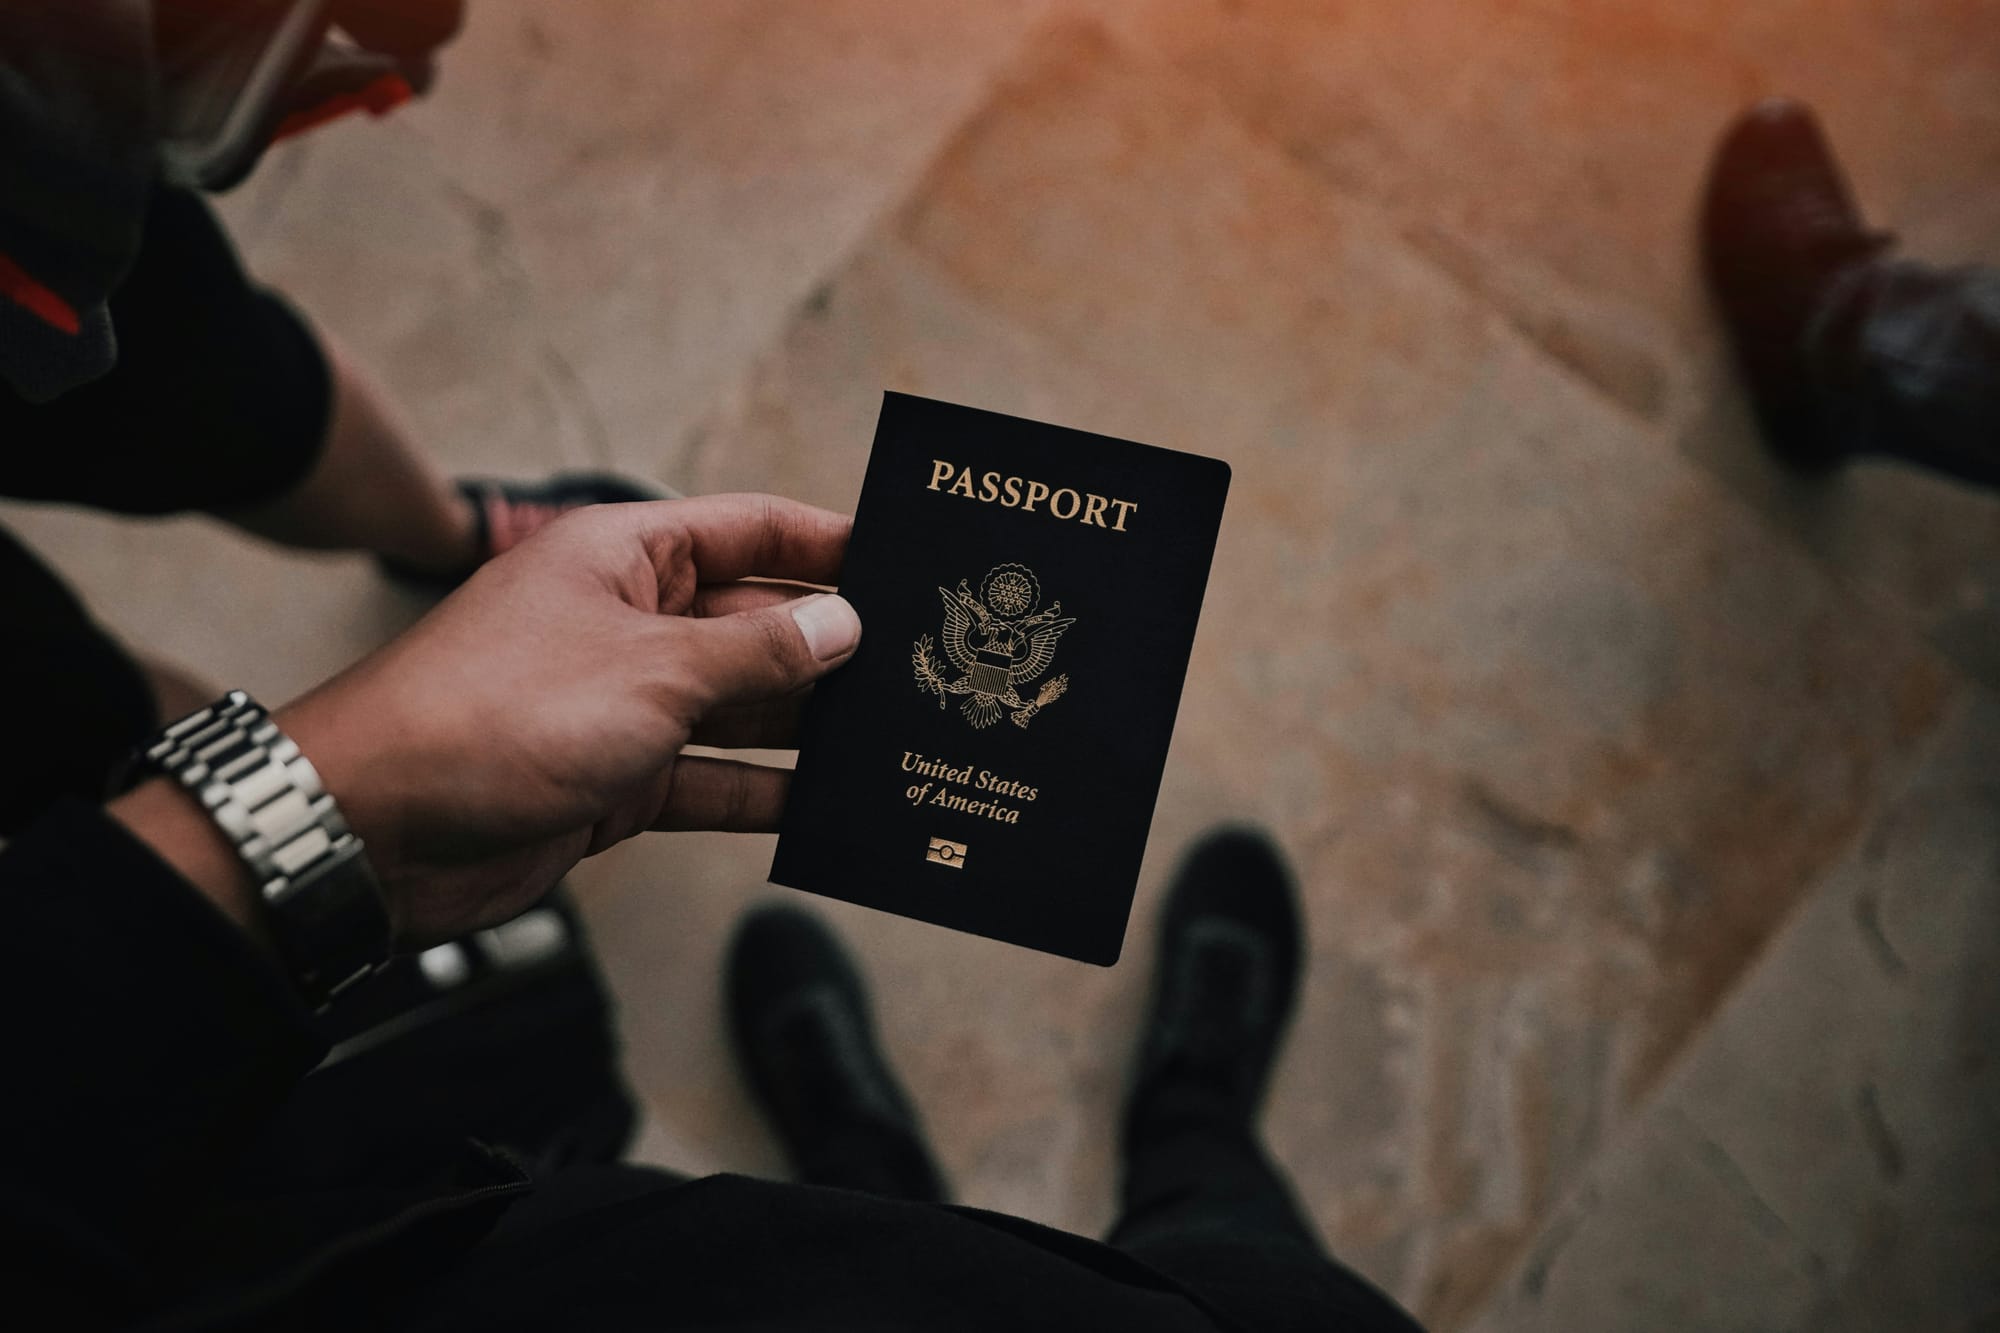                      What to Do if You Lose Your Passport                             
                     